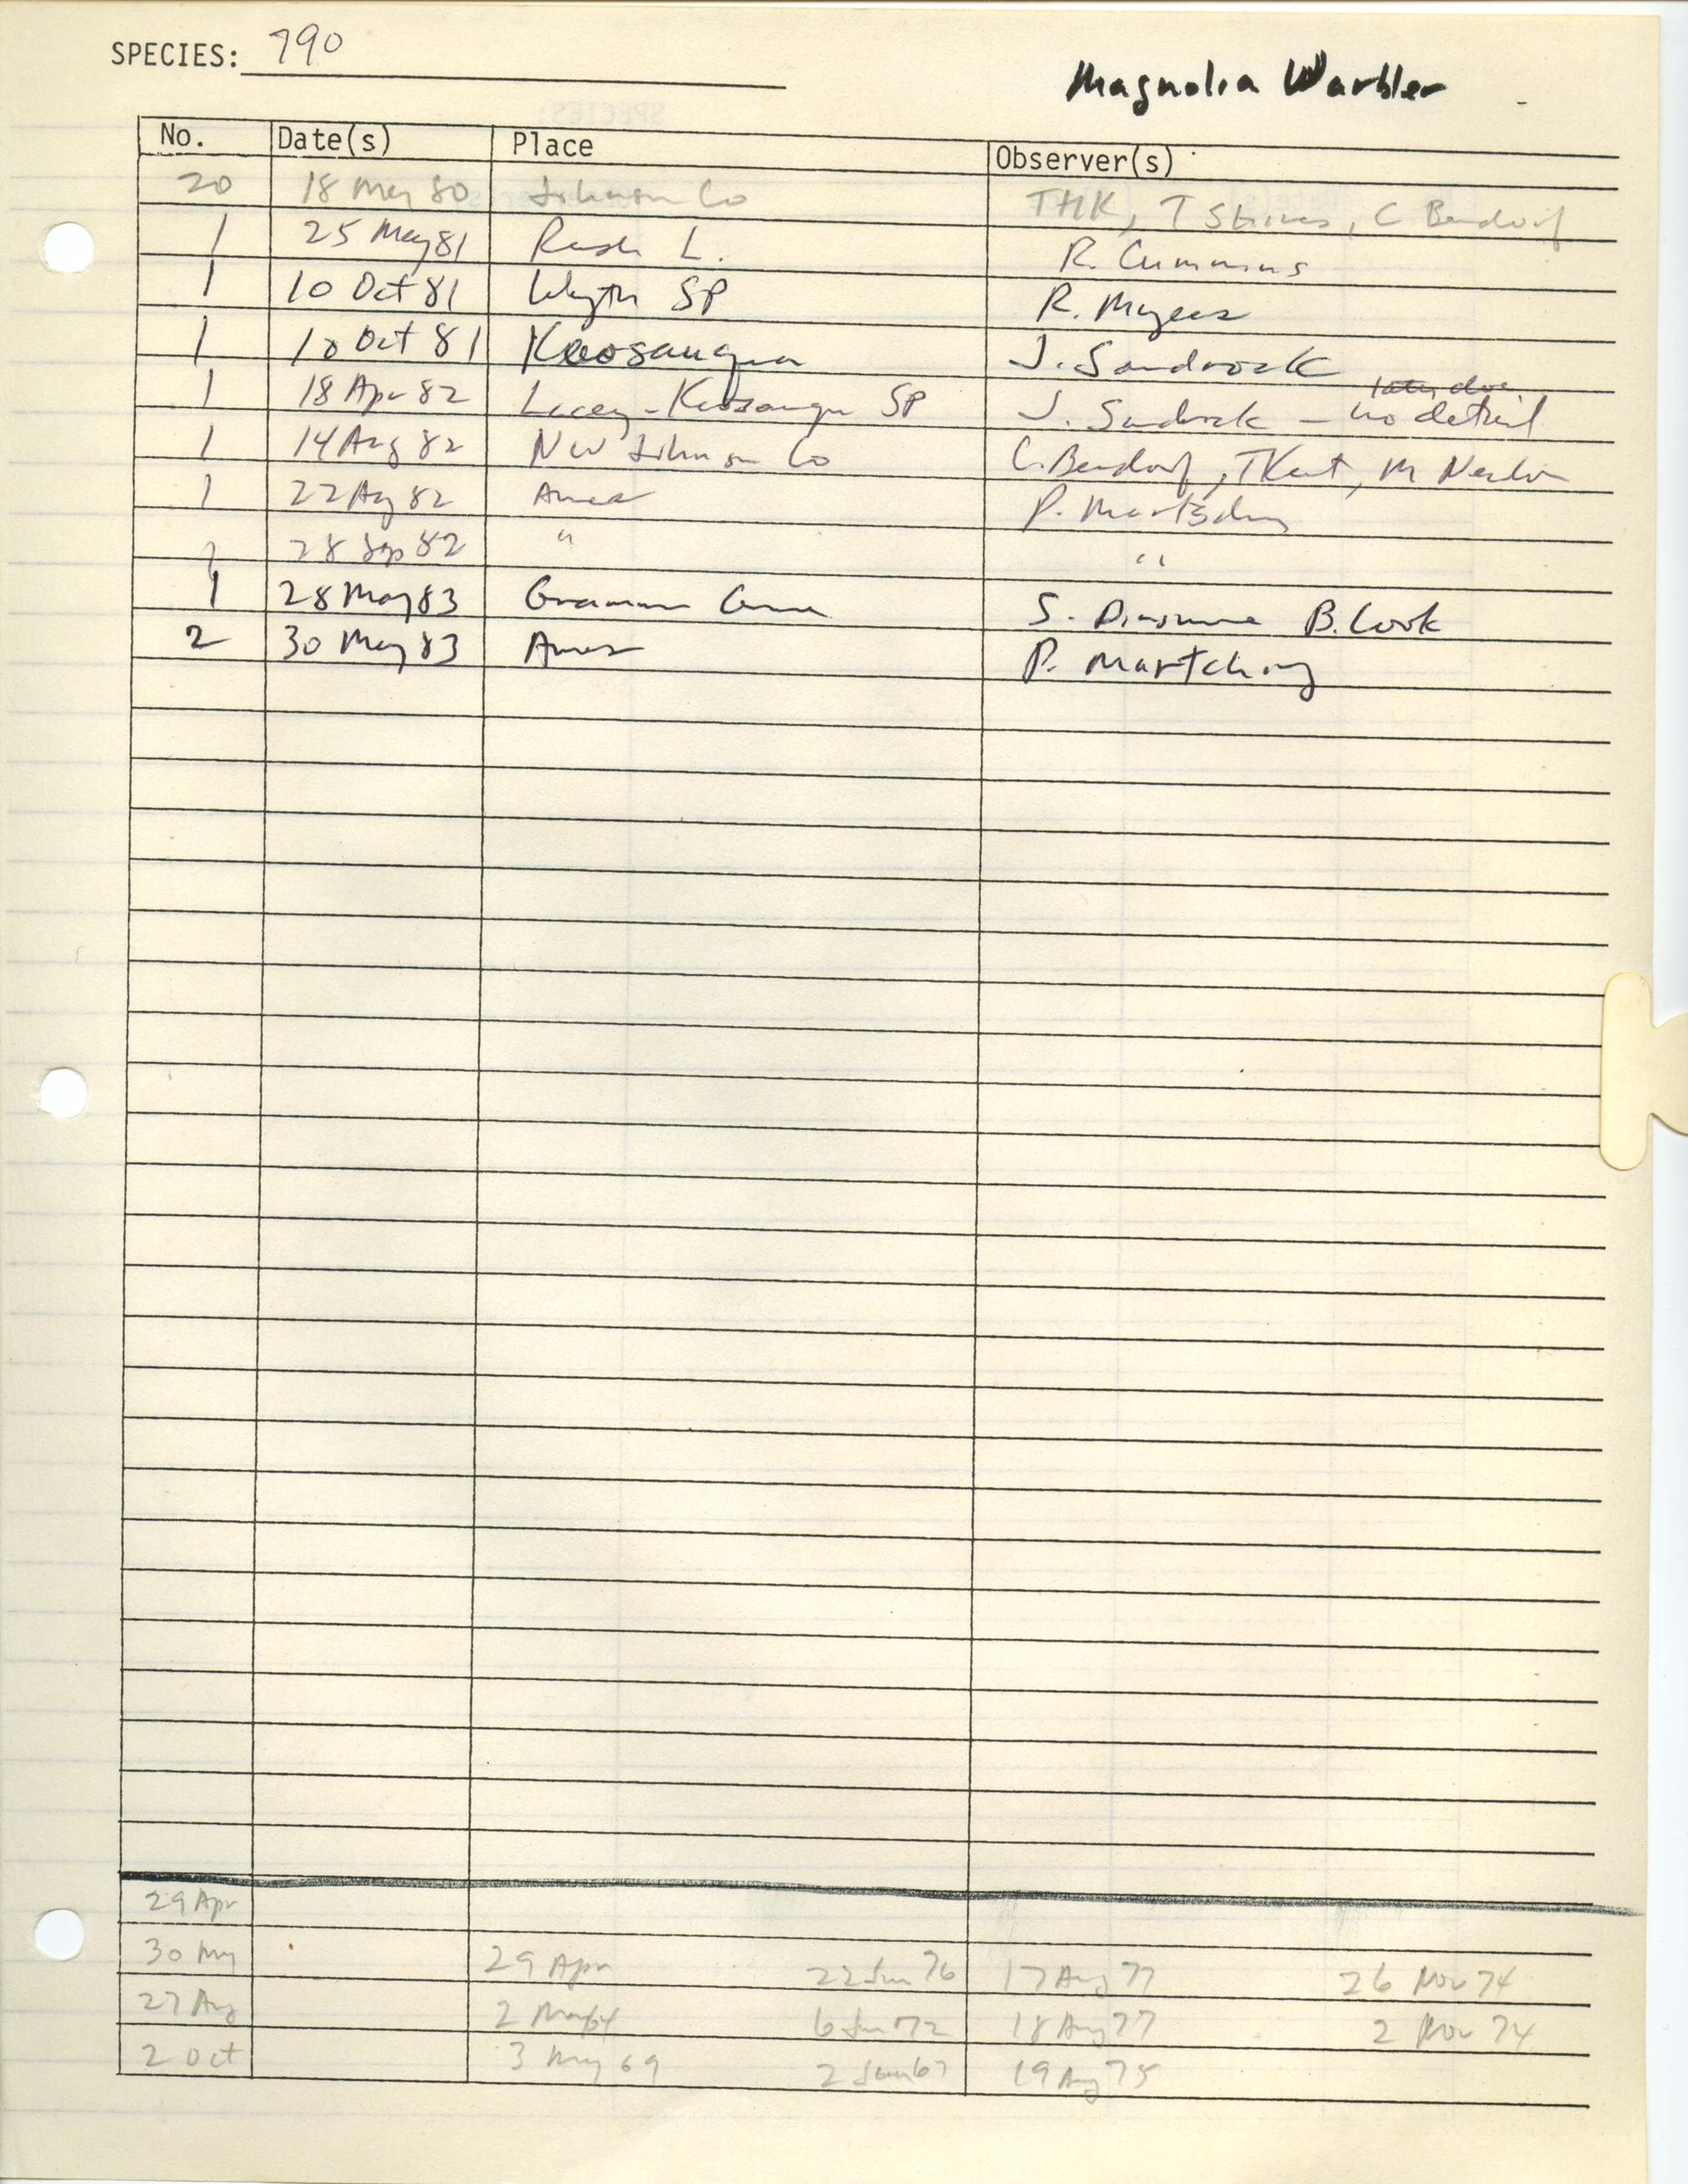 Iowa Ornithologists' Union, field report compiled data, Magnolia Warbler, 1980-1983